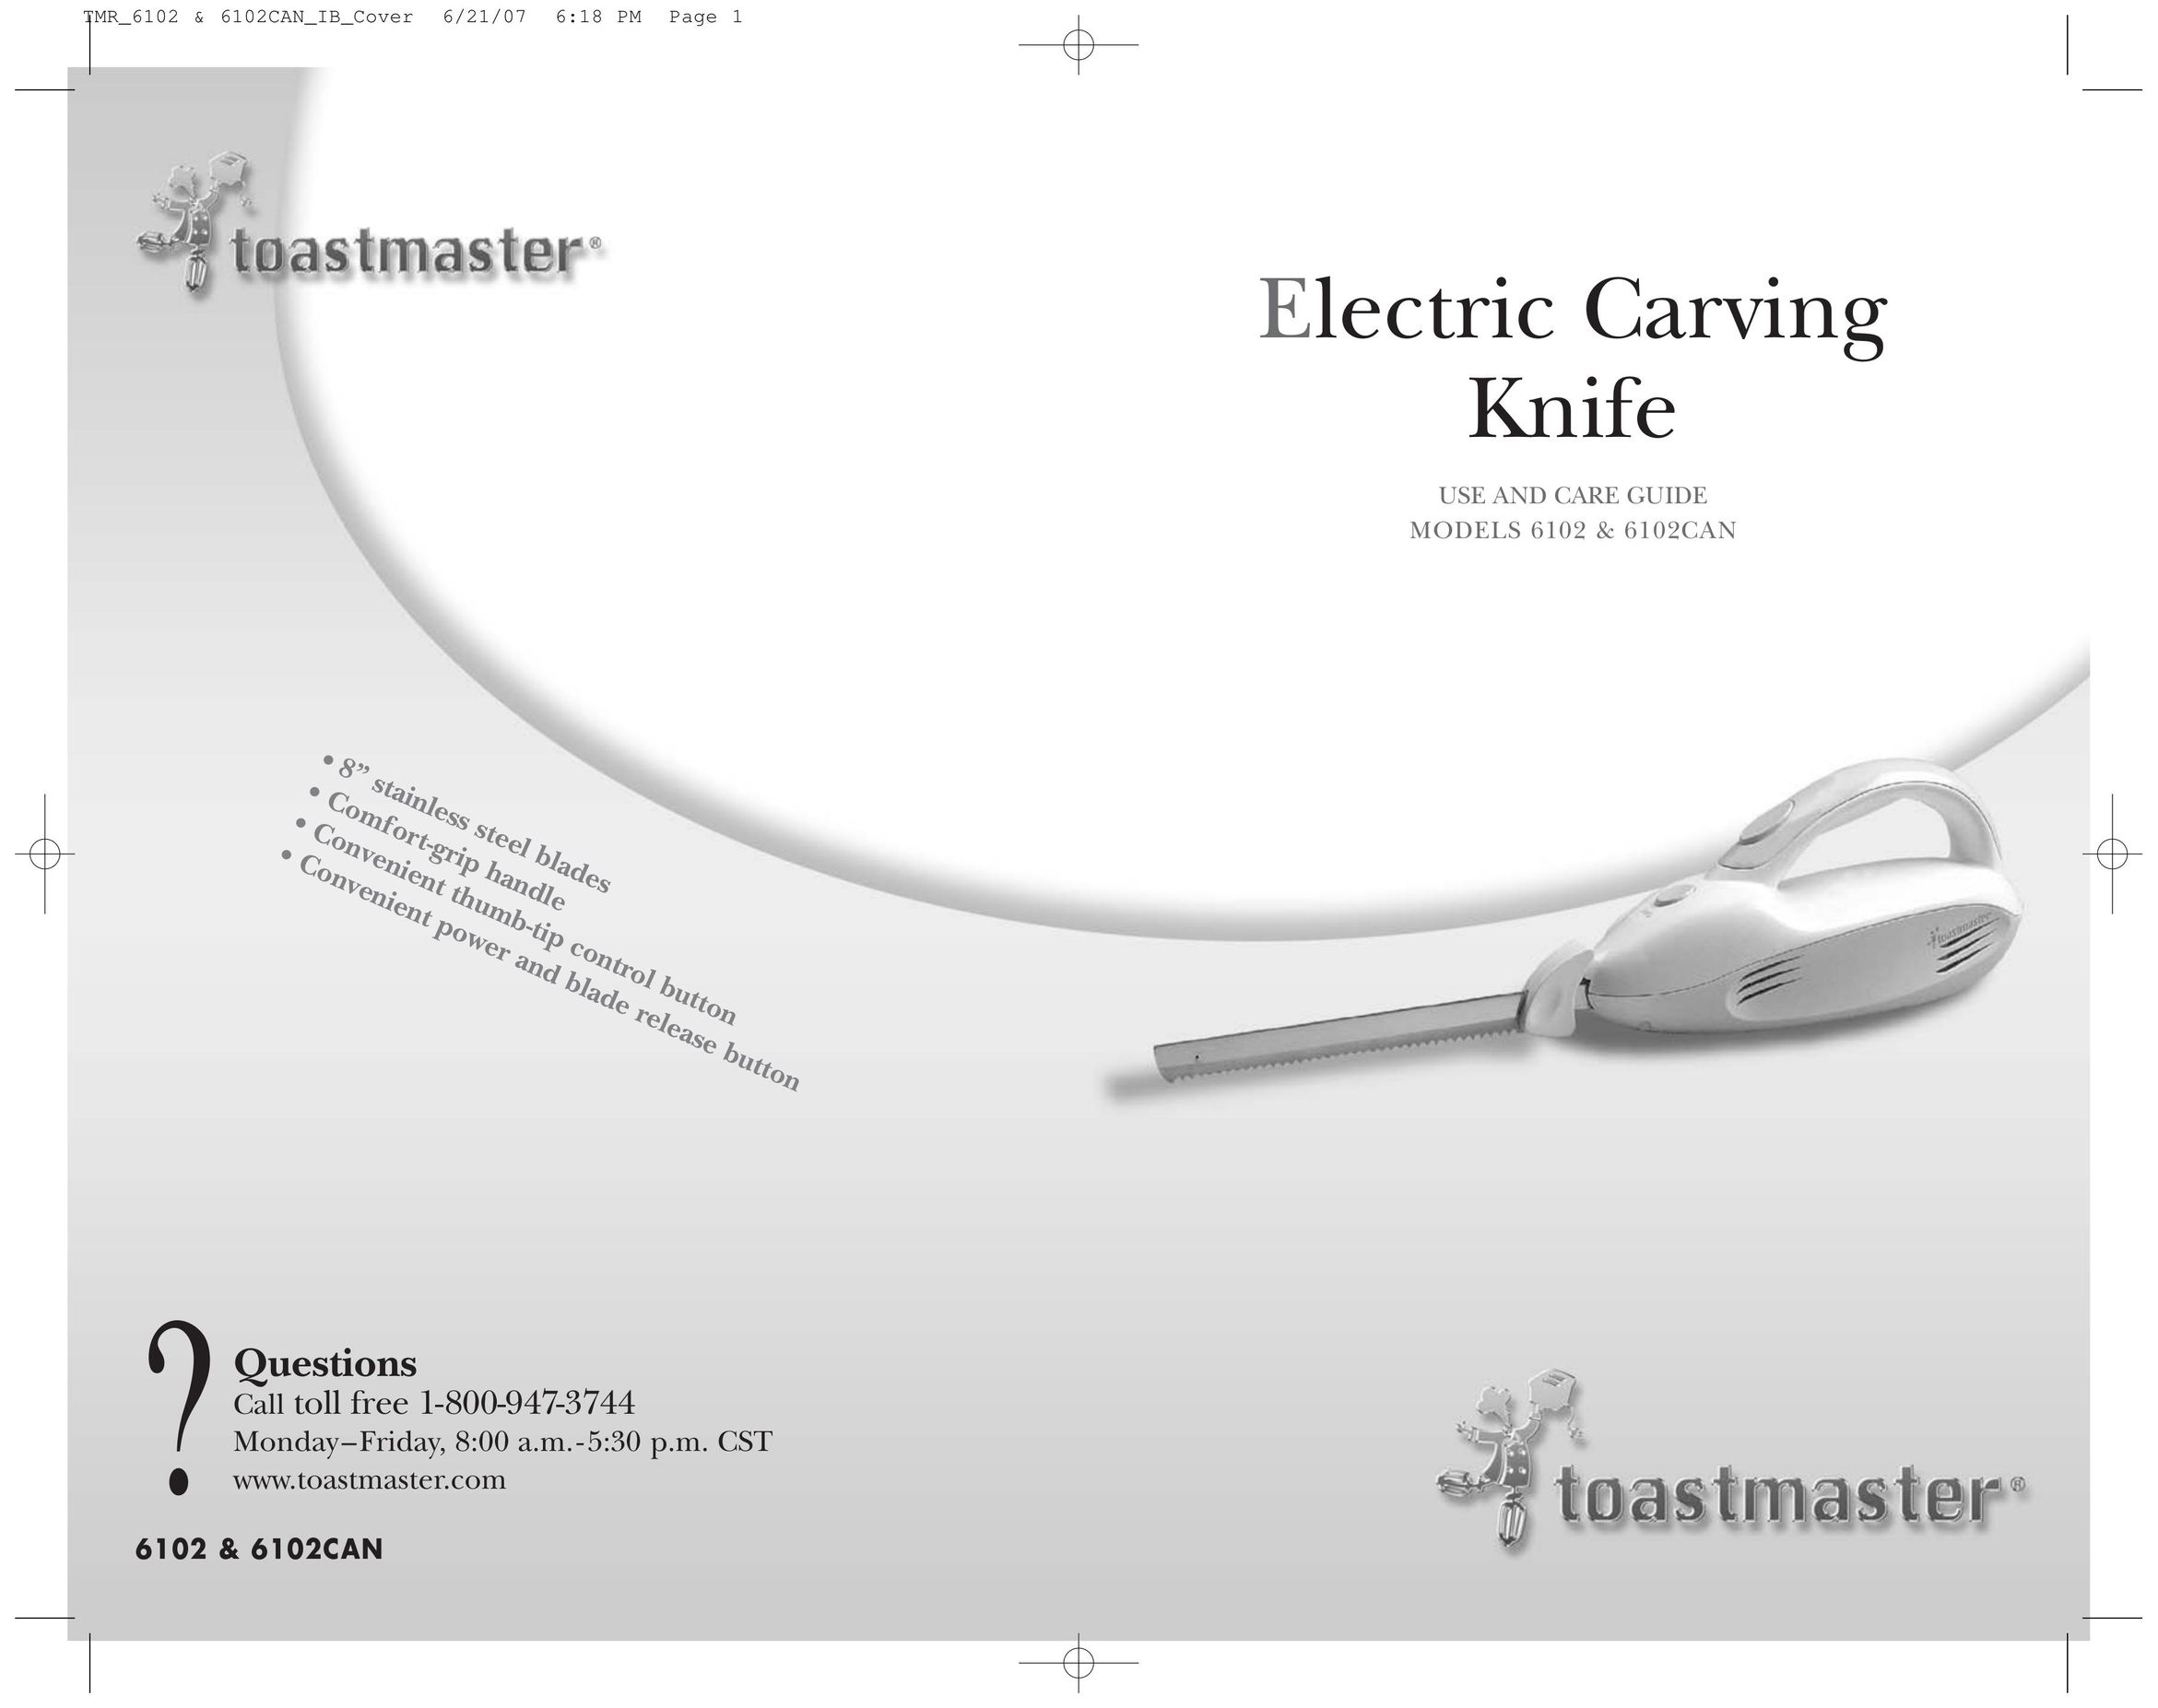 Toastmaster 6102CAN Kitchen Utensil User Manual